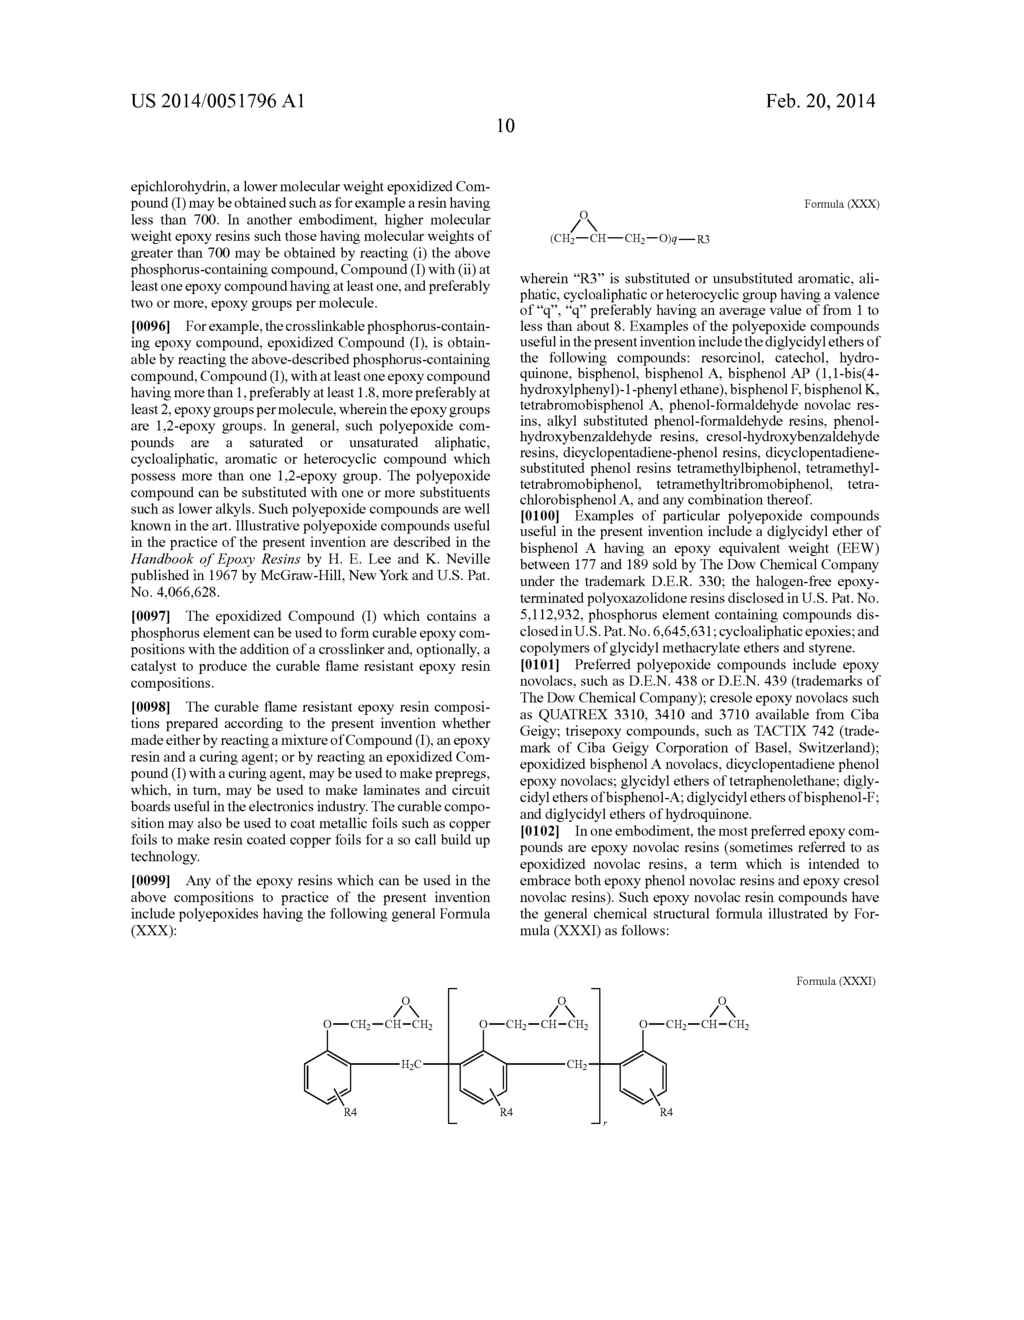 PHOSPHORUS-CONTAINING COMPOUNDS USEFUL FOR MAKING HALOGEN-FREE,     IGNITION-RESISTANT POLYMERS - diagram, schematic, and image 11